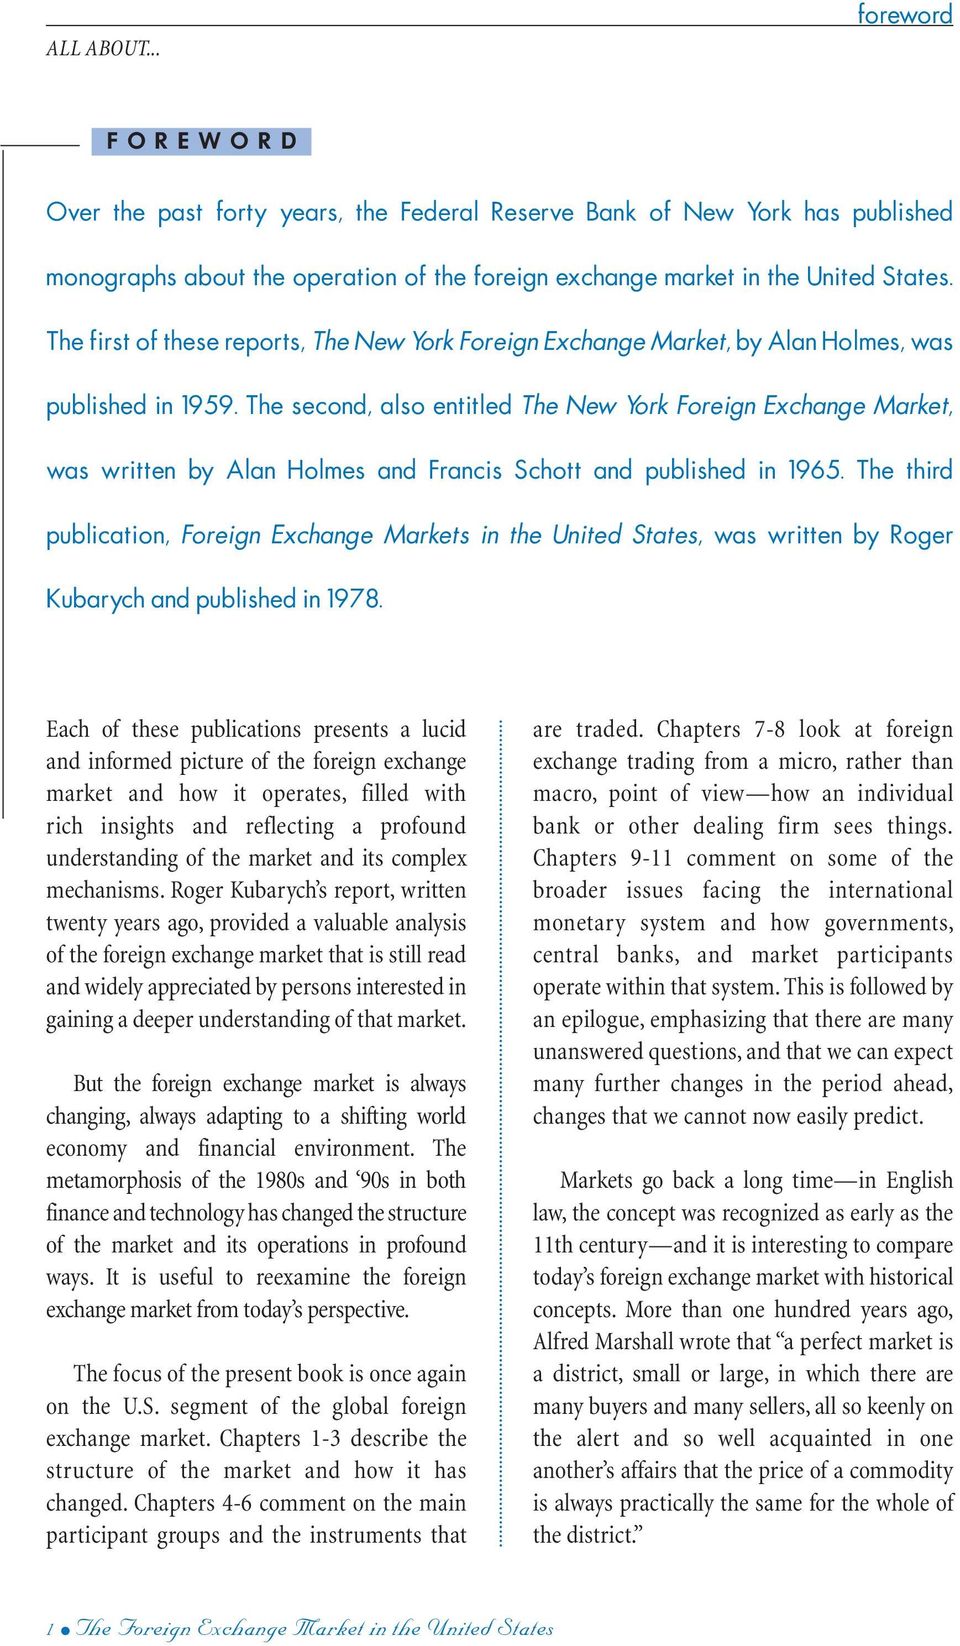 The second, also entitled The New York Foreign Exchange Market, was written by Alan Holmes and Francis Schott and published in 1965.